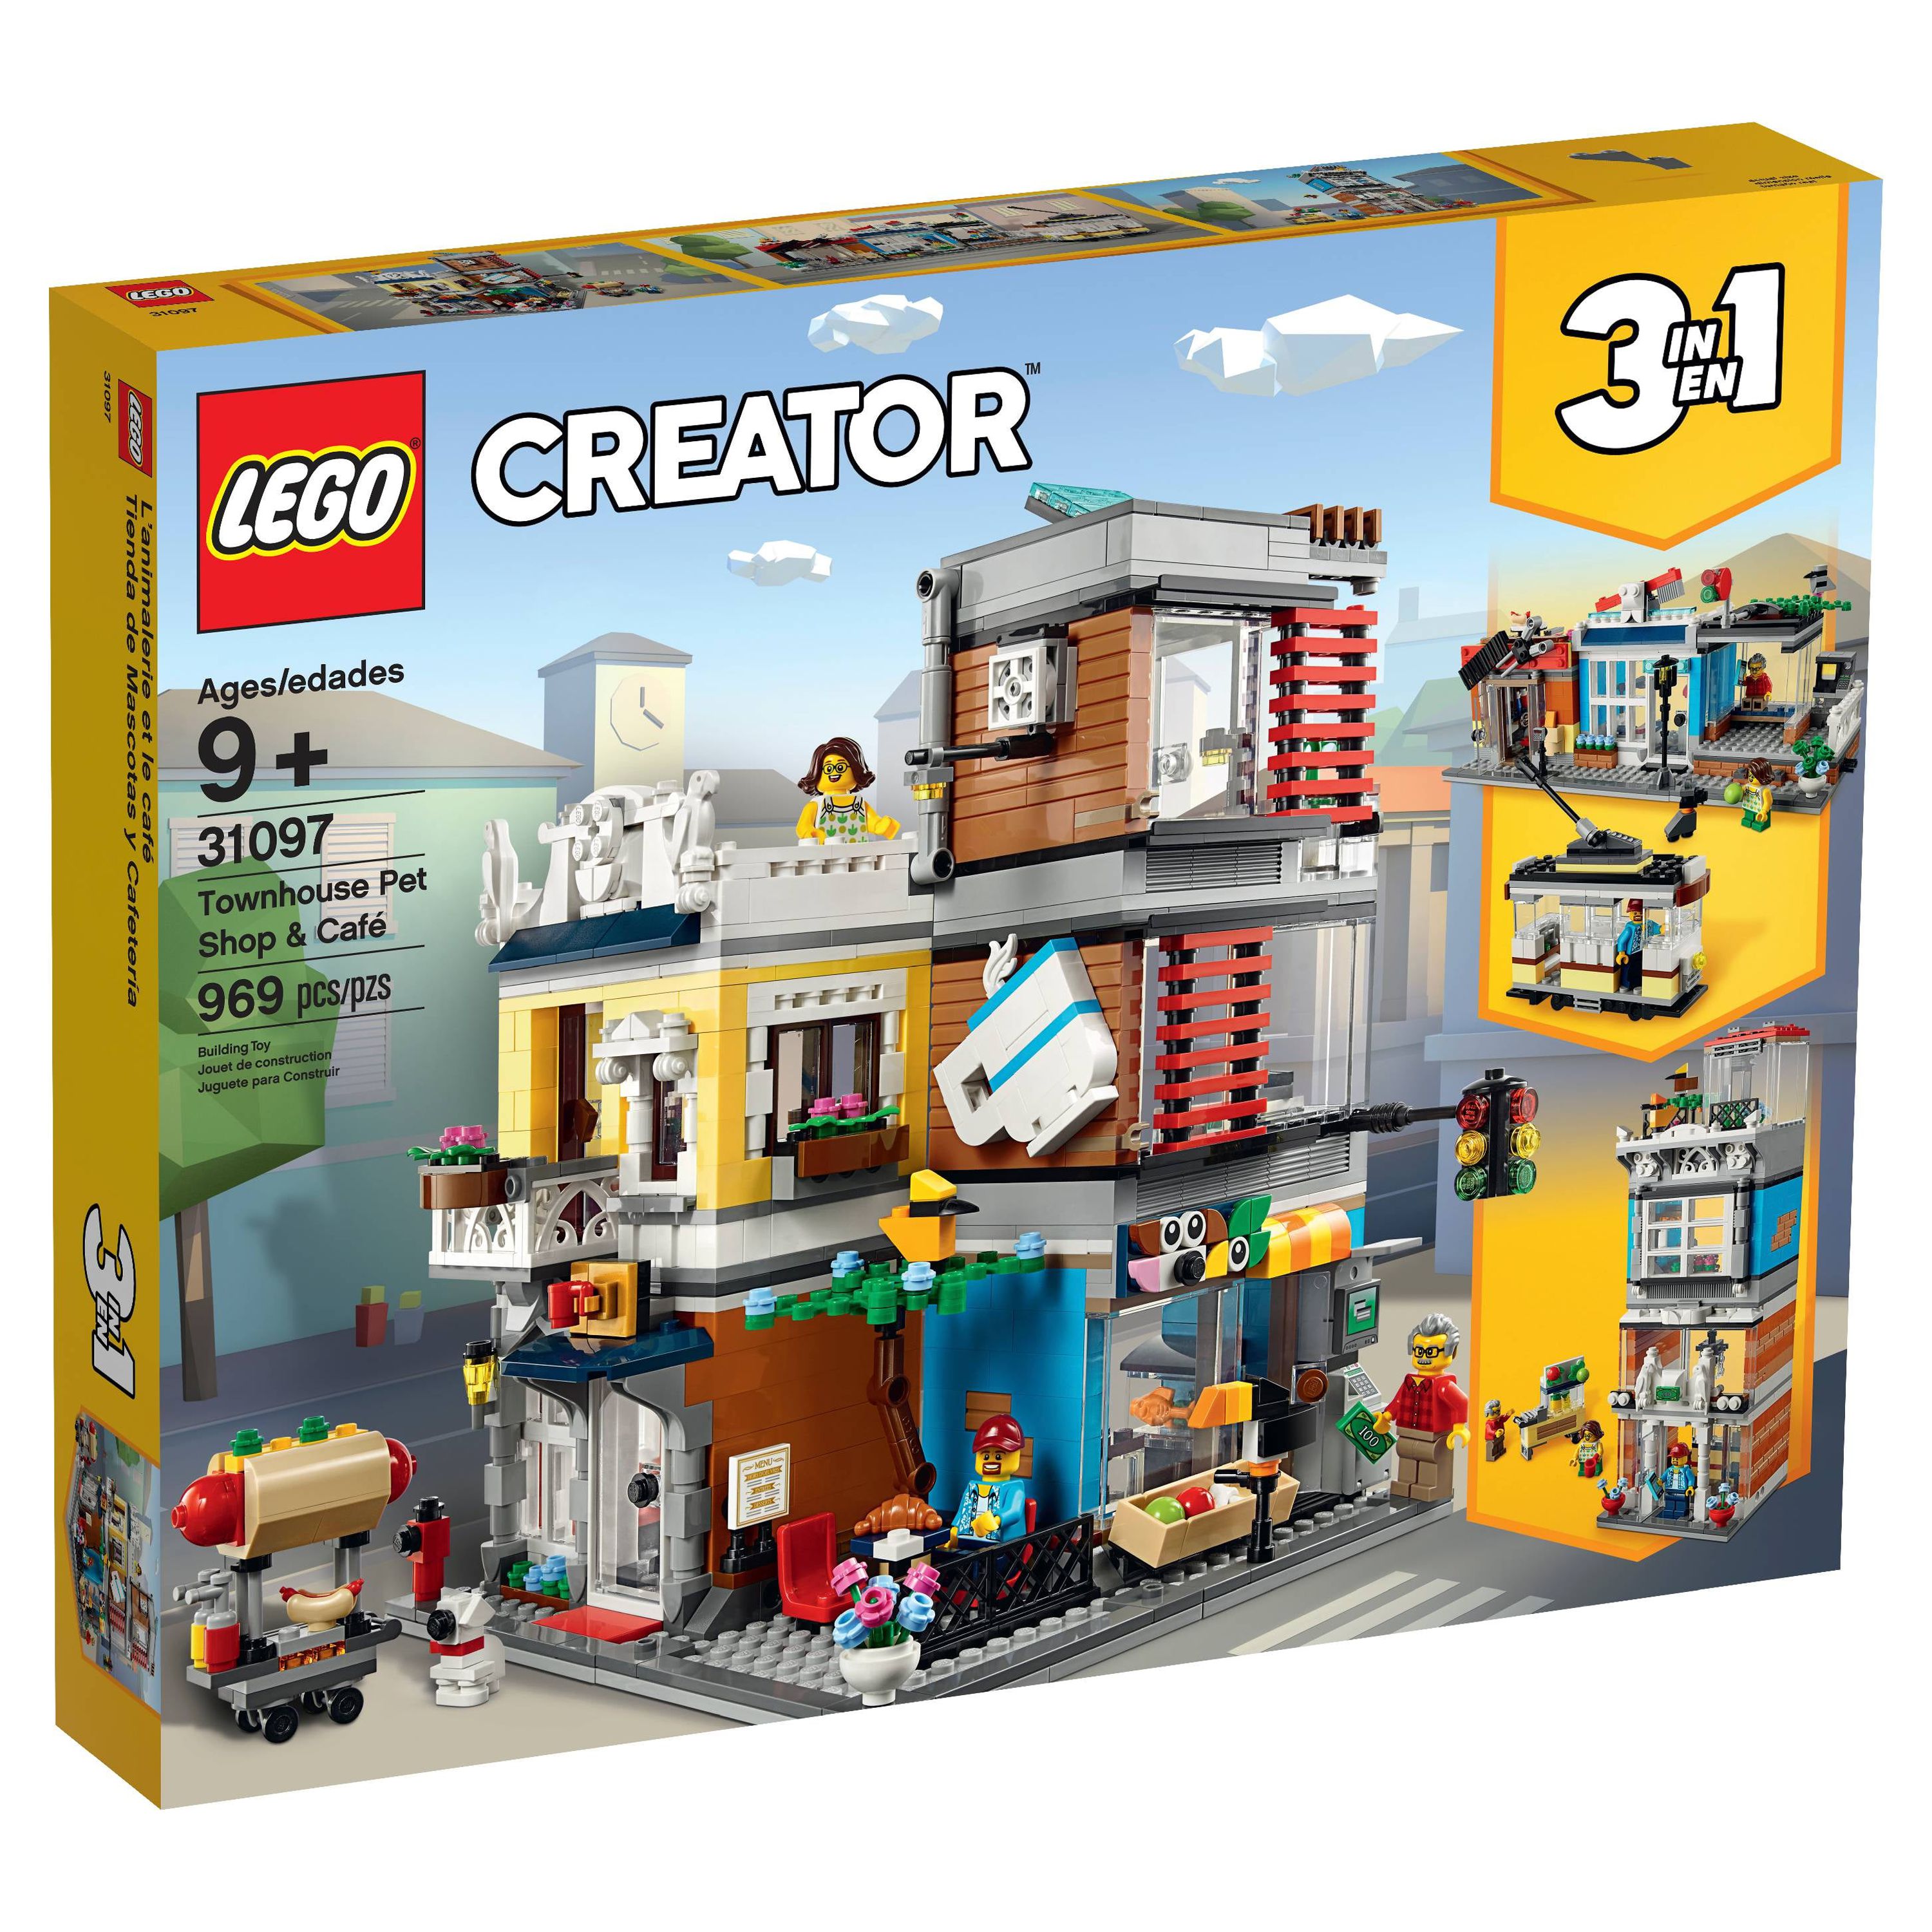 LEGO Creator 3-in-1 Townhouse Pet Shop & Cafe 31097 Store Building Set - image 5 of 8